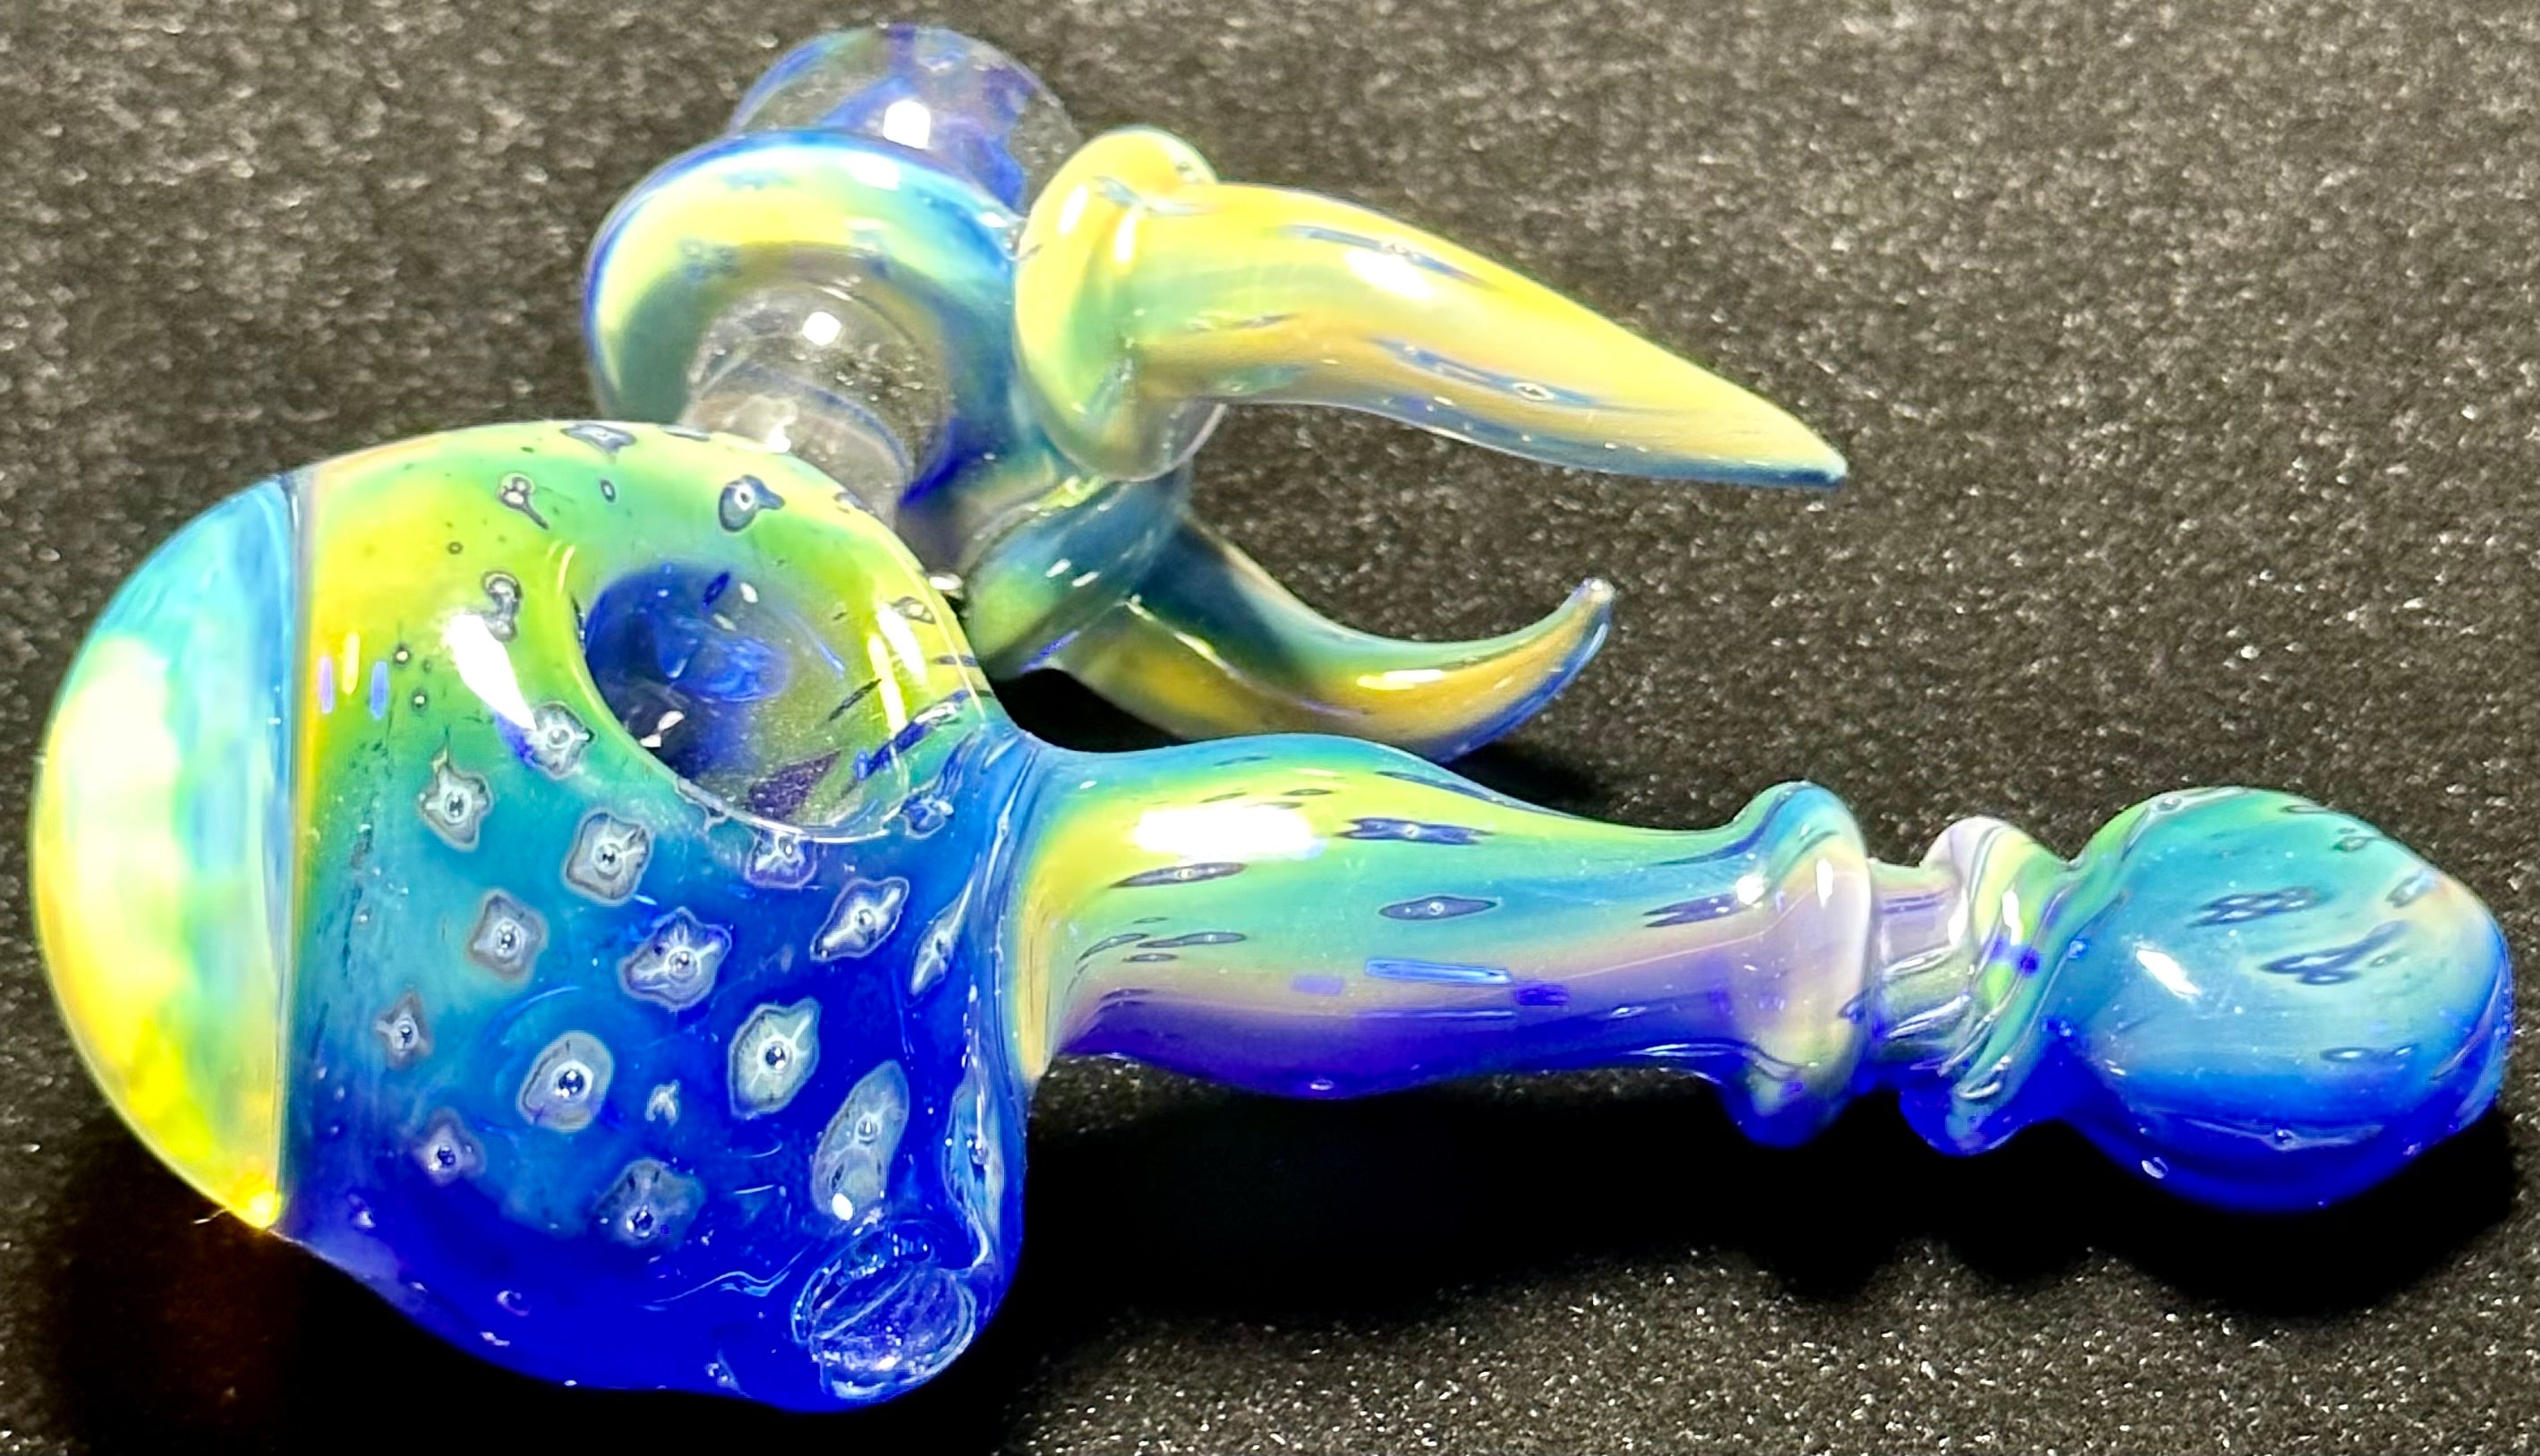 Fearn Gully Bubbletrap Fumed Honeycomb with Mibs & Talons Spoon